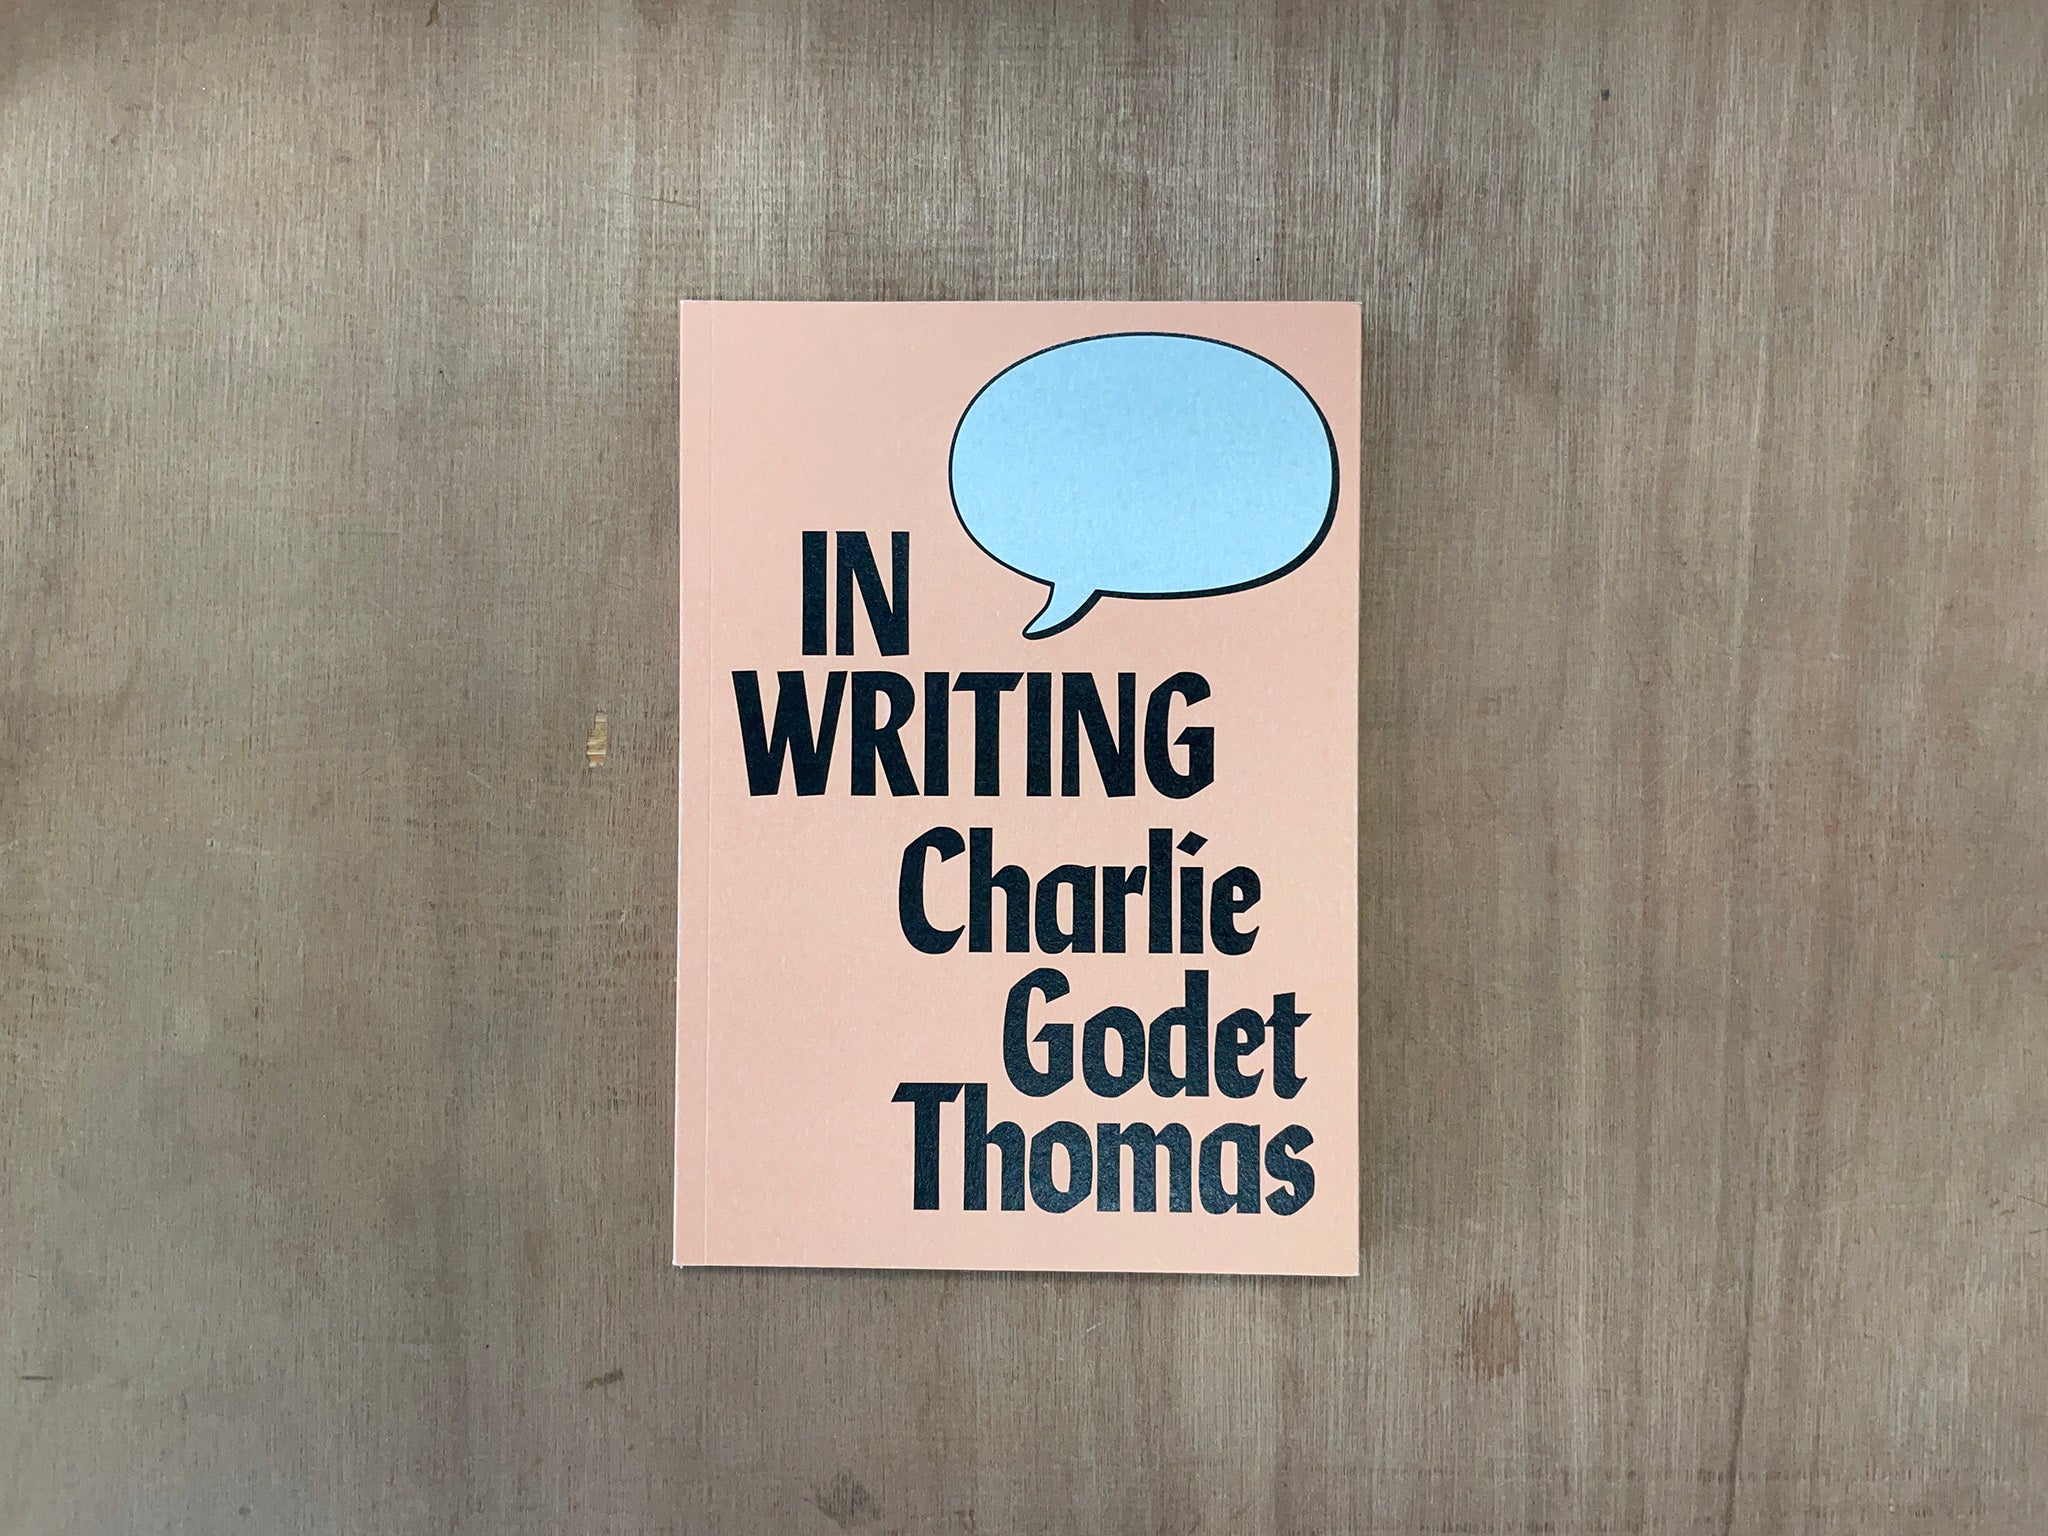 IN WRITING by Charlie Godet Thomas